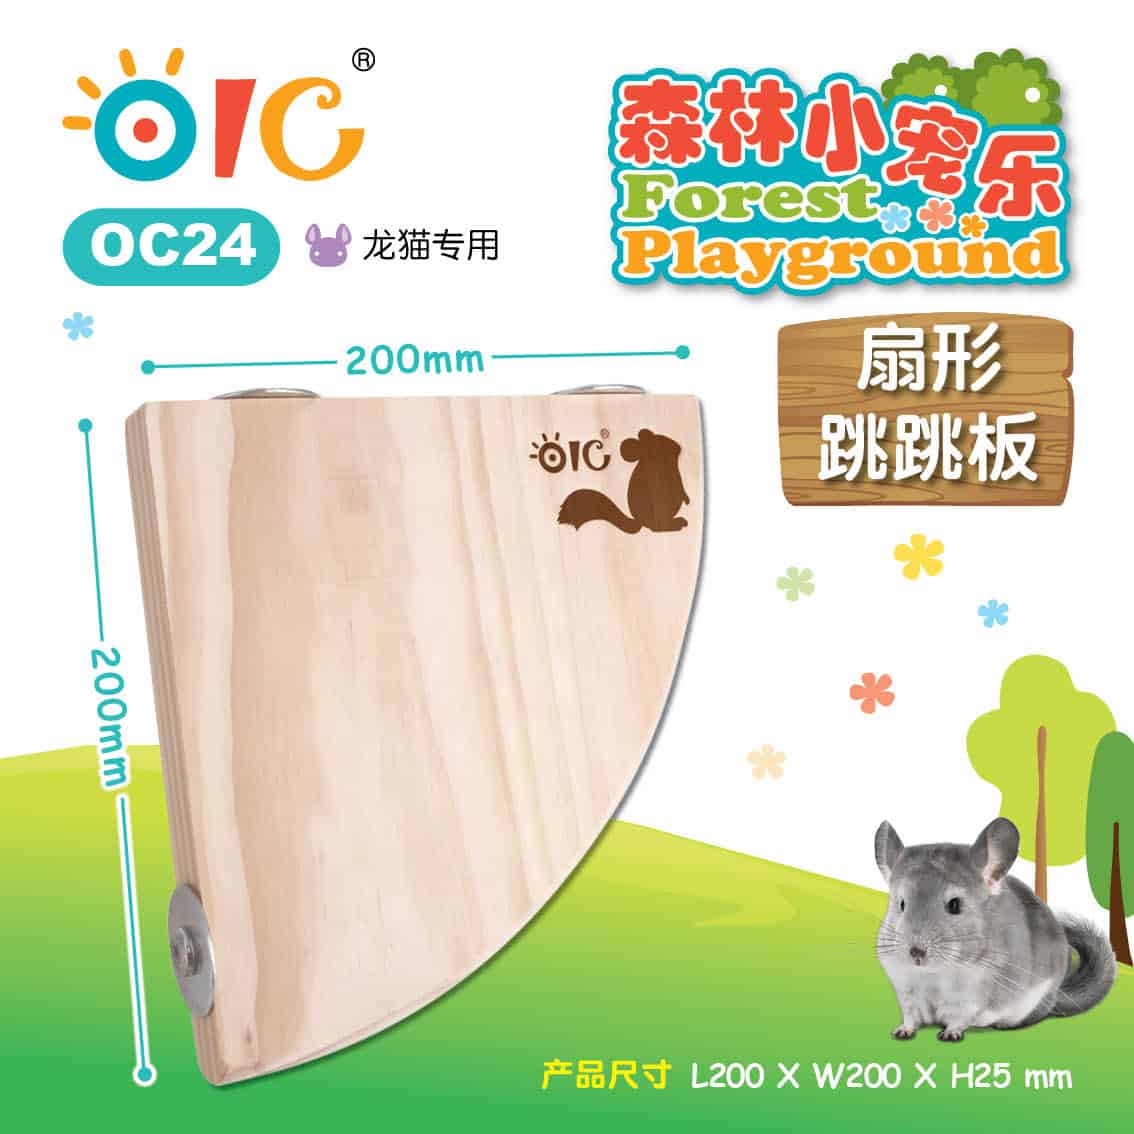 OIC OC24 Forest Playground Fan-shaped Jump Board